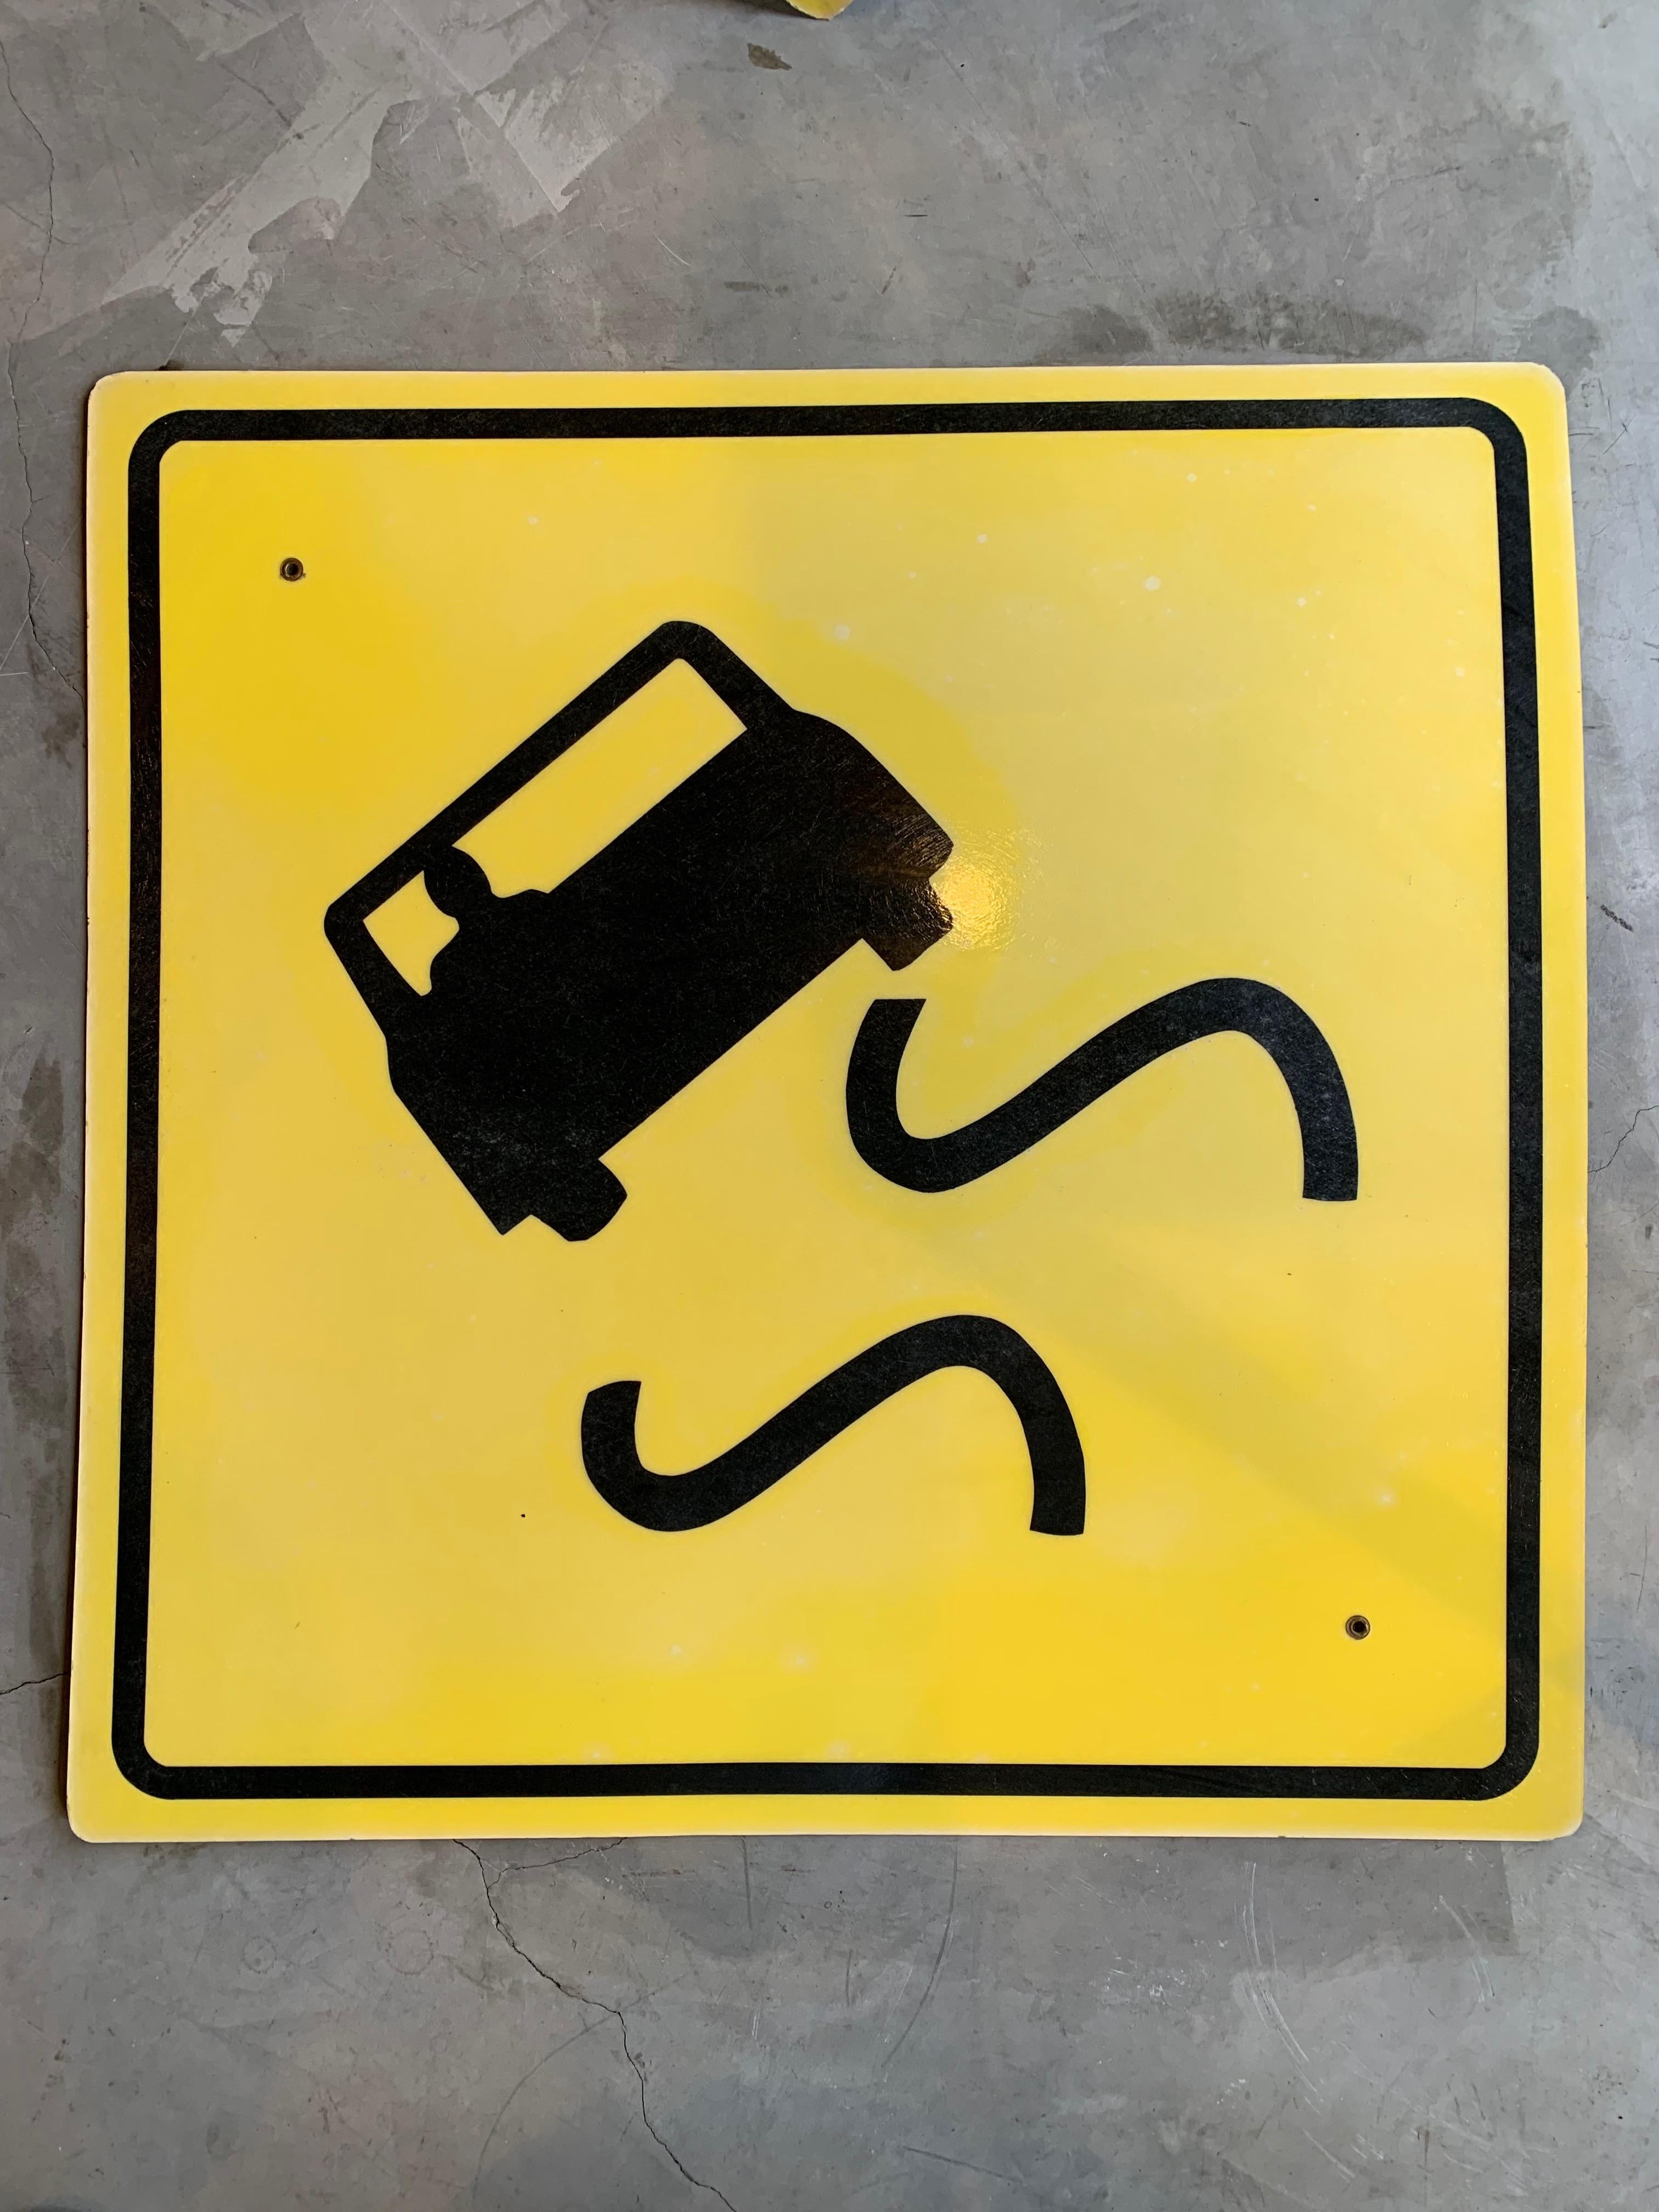 Vintage plastic road sign from Los Angeles. Slippery road ahead. Large in scale. Yellow background with black graphics. Cool piece of wall art.